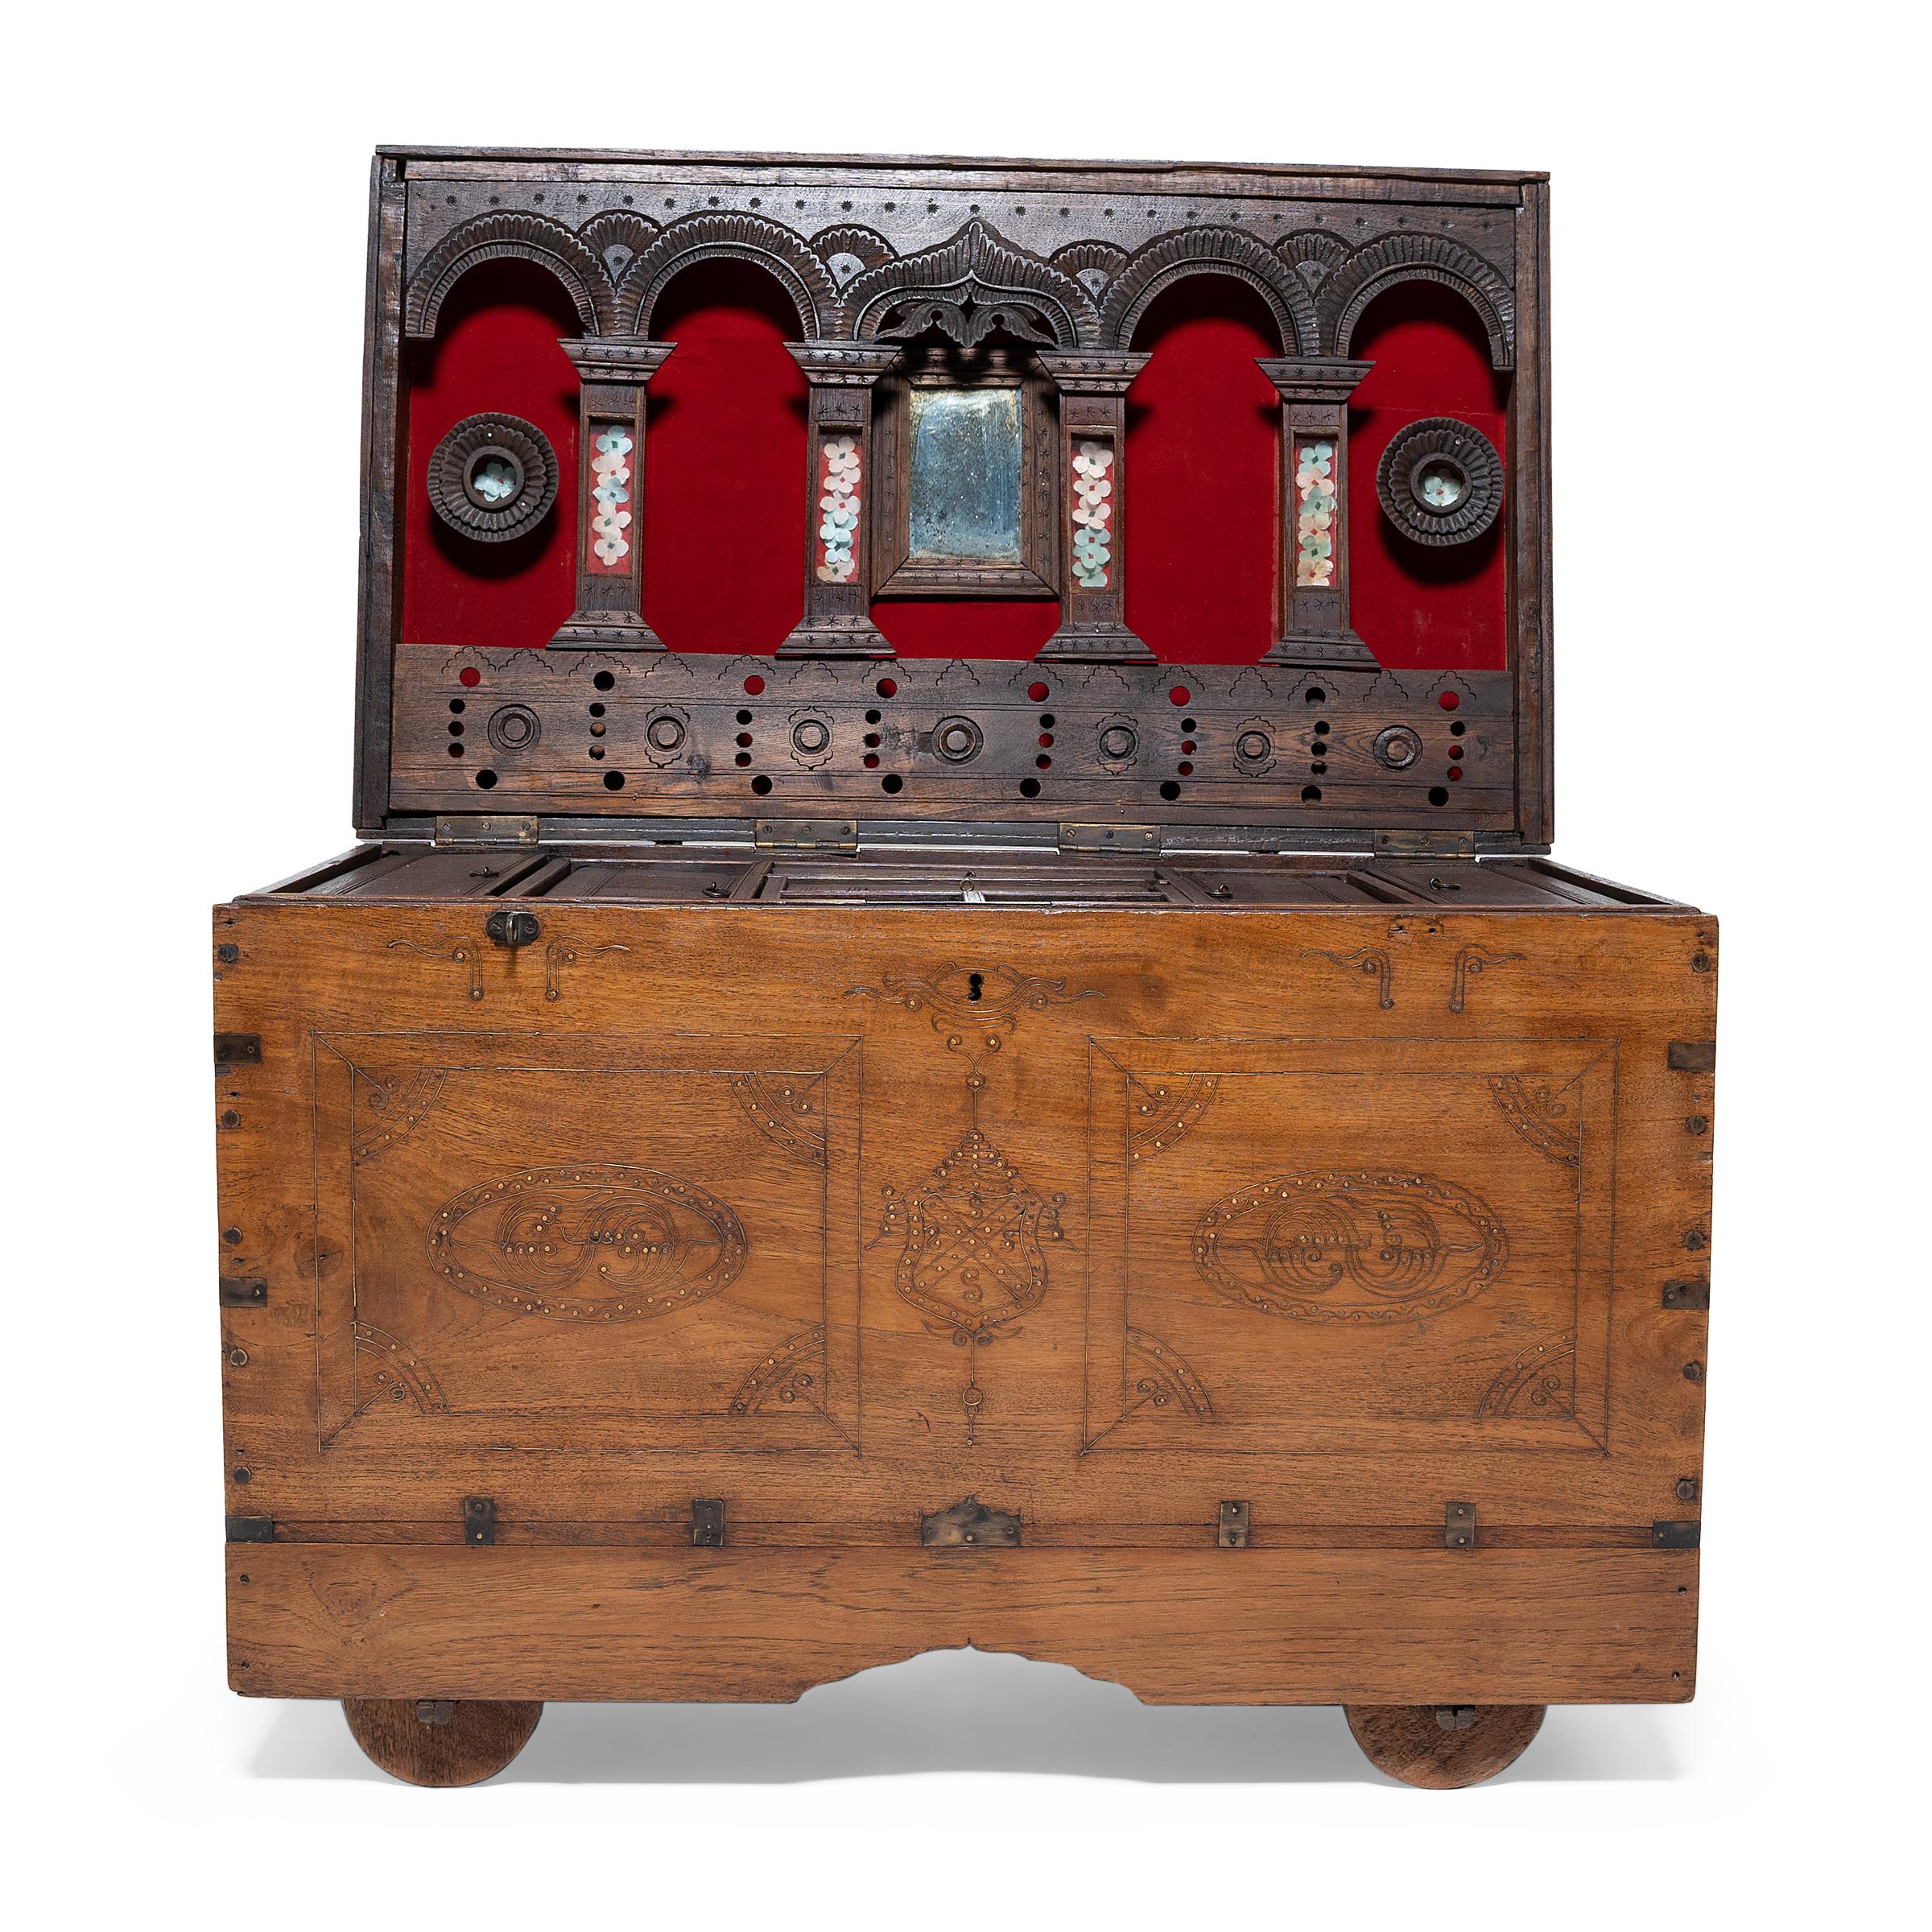 This unassuming wooden trunk is an early 20th century actor's chest from Mandalay, Burma. Used by a traveling opera performer or stage actor, the trunk opens to reveal several interior compartments for storing costumes, makeup, money, and personal